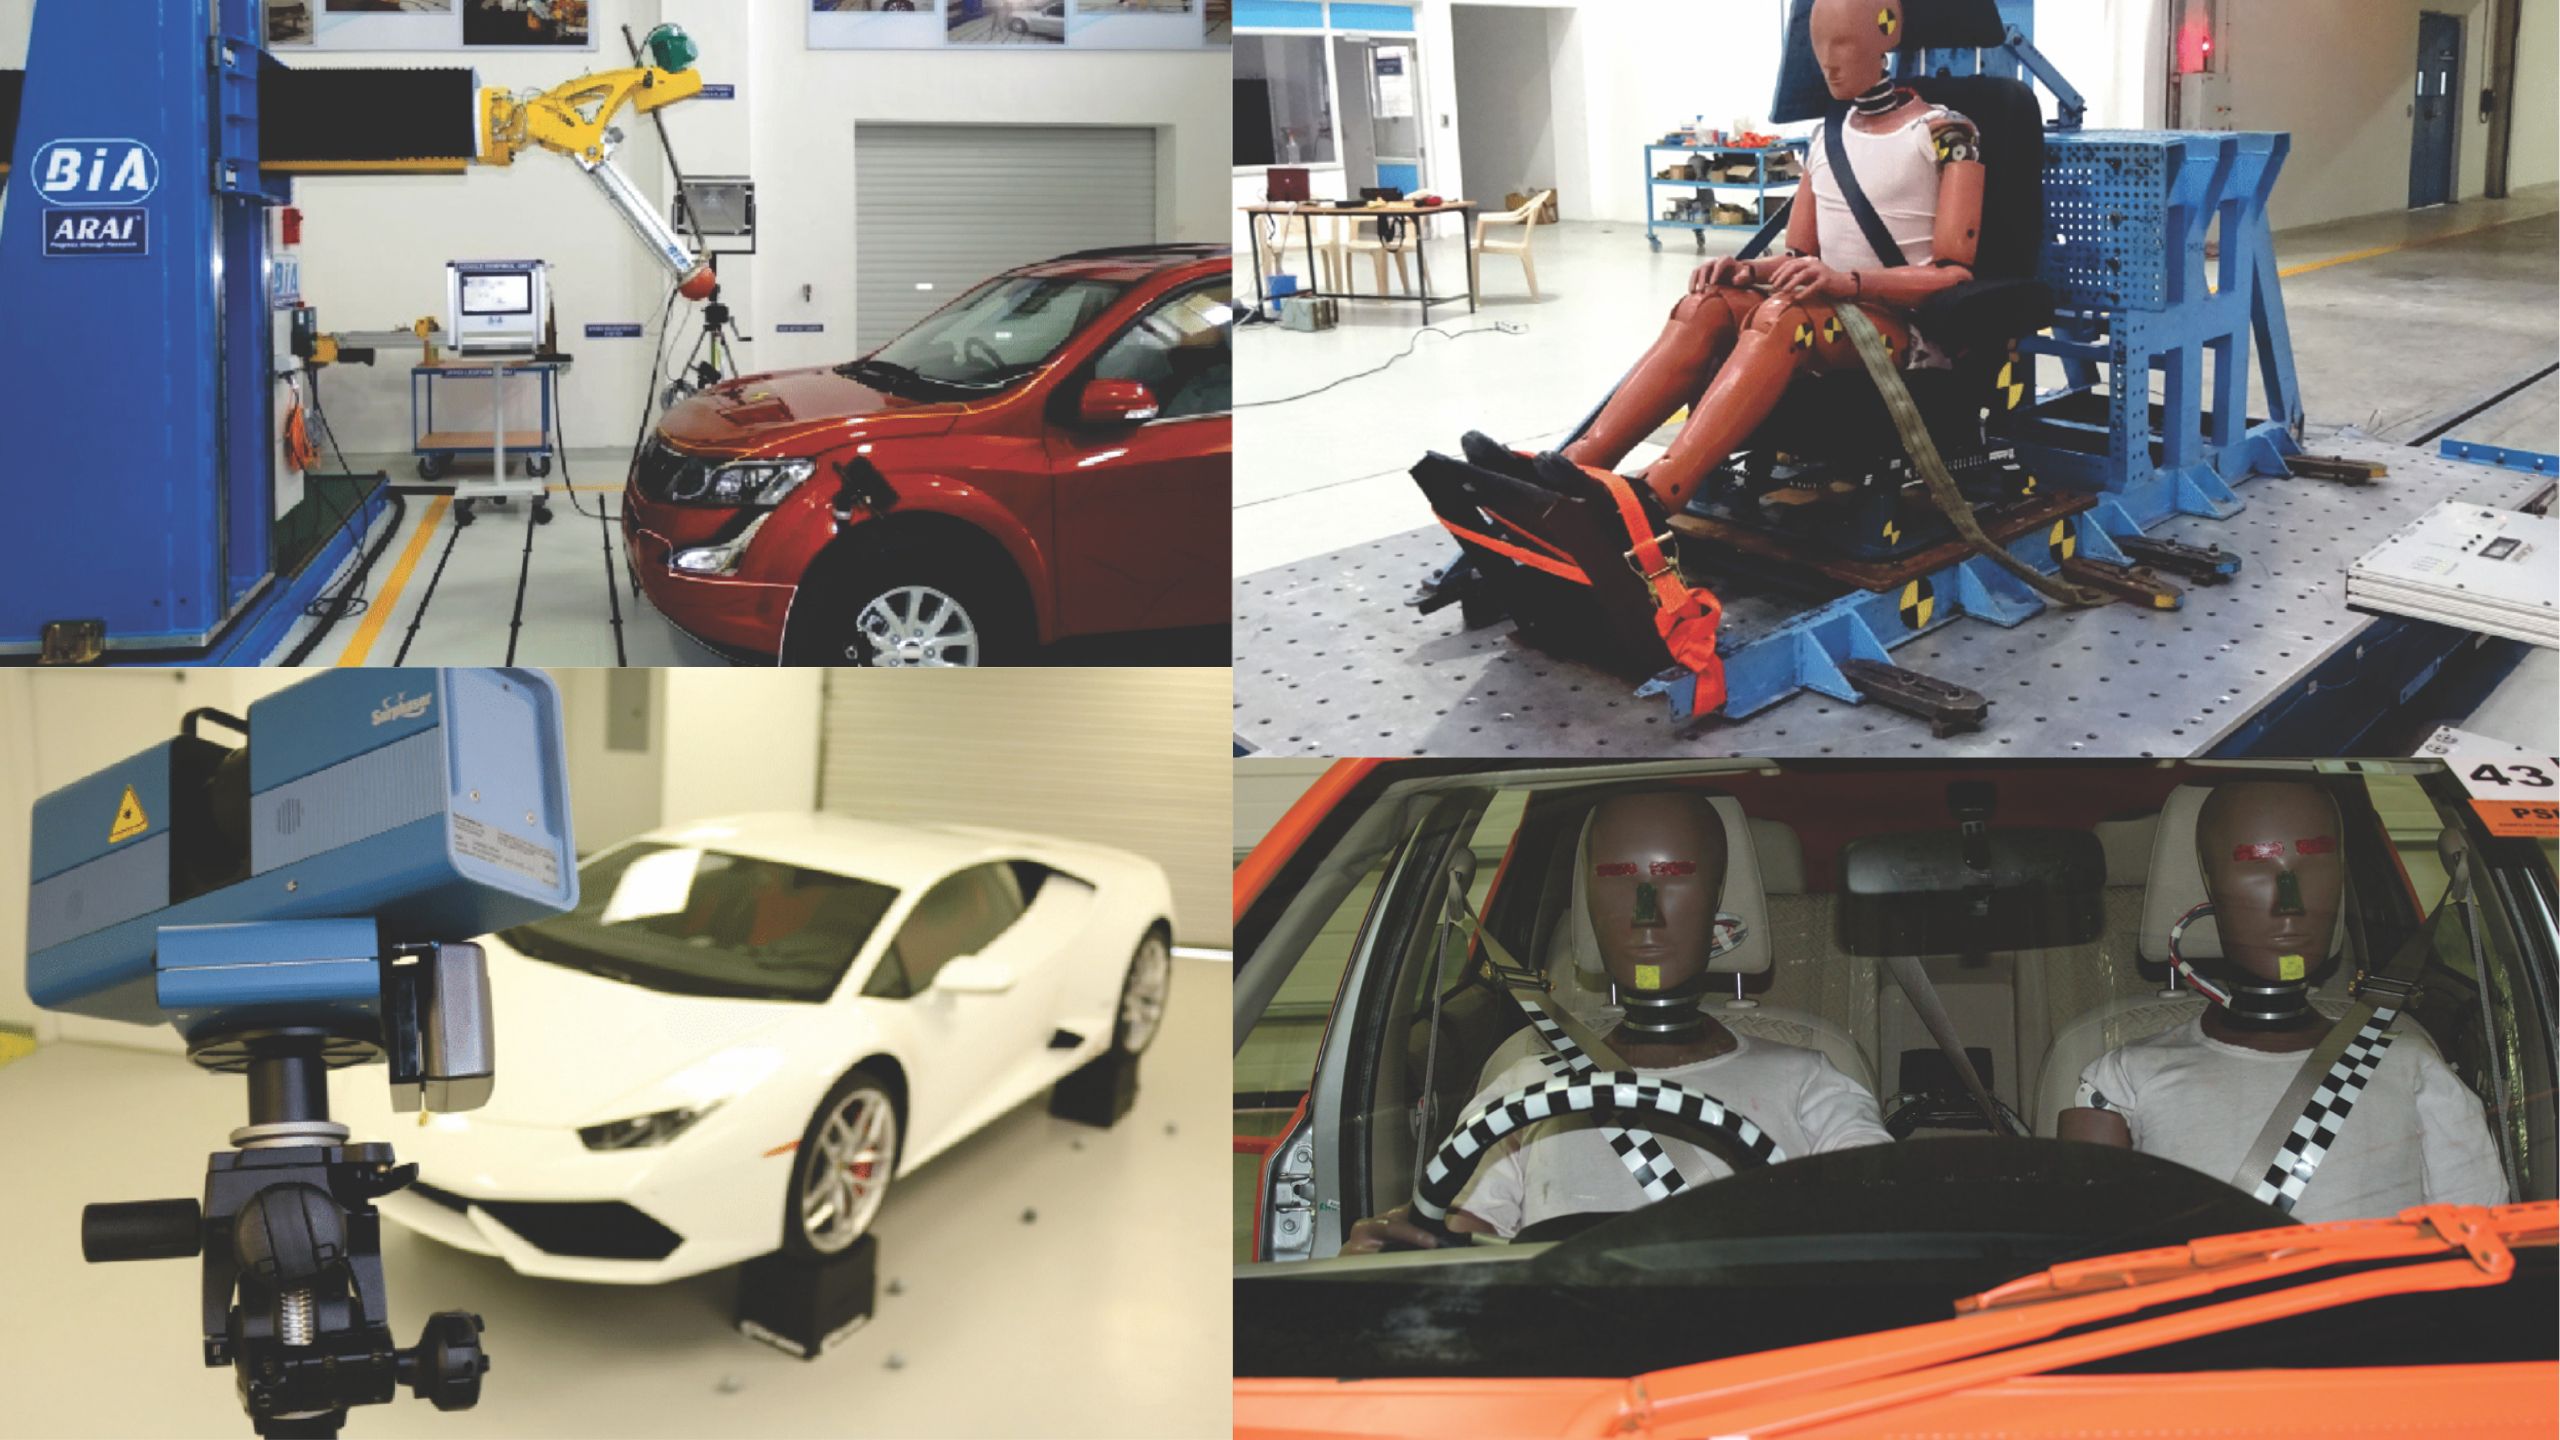 Various measures are taken in Crash Tests and Safety Assessments